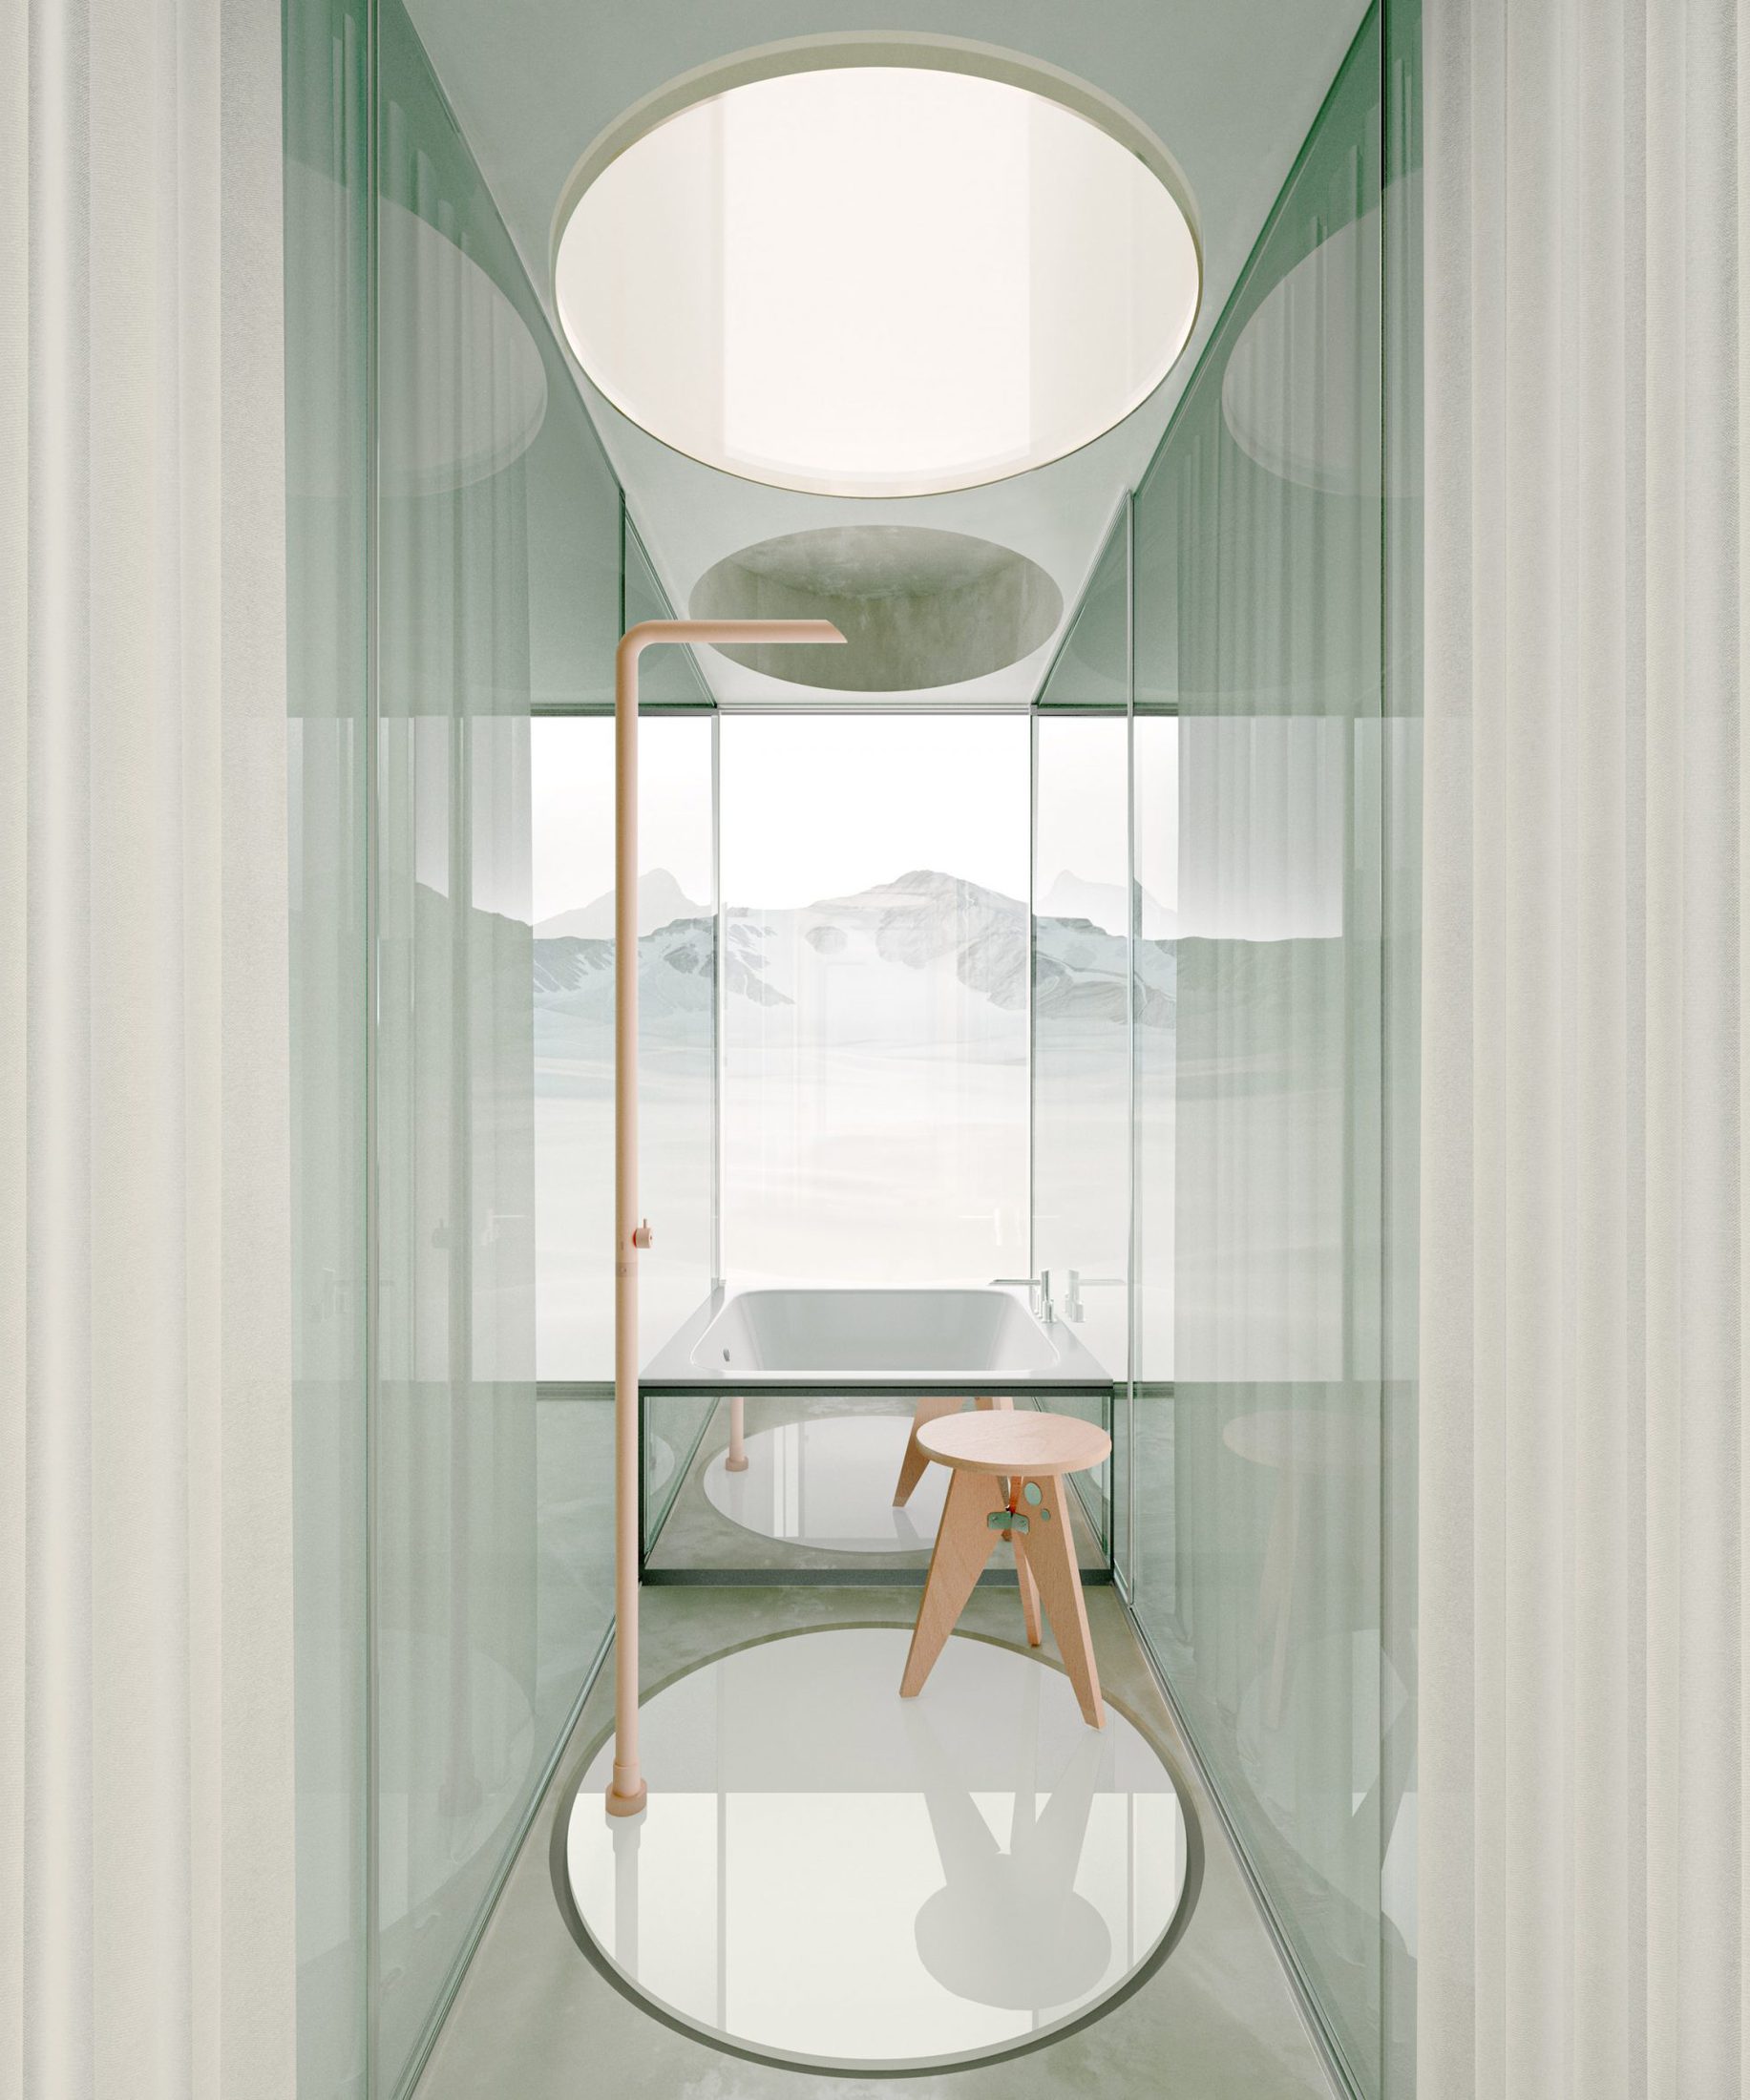 andres reisigner winter house metaverse architecture dezeen 2364 col 0 scaled 1